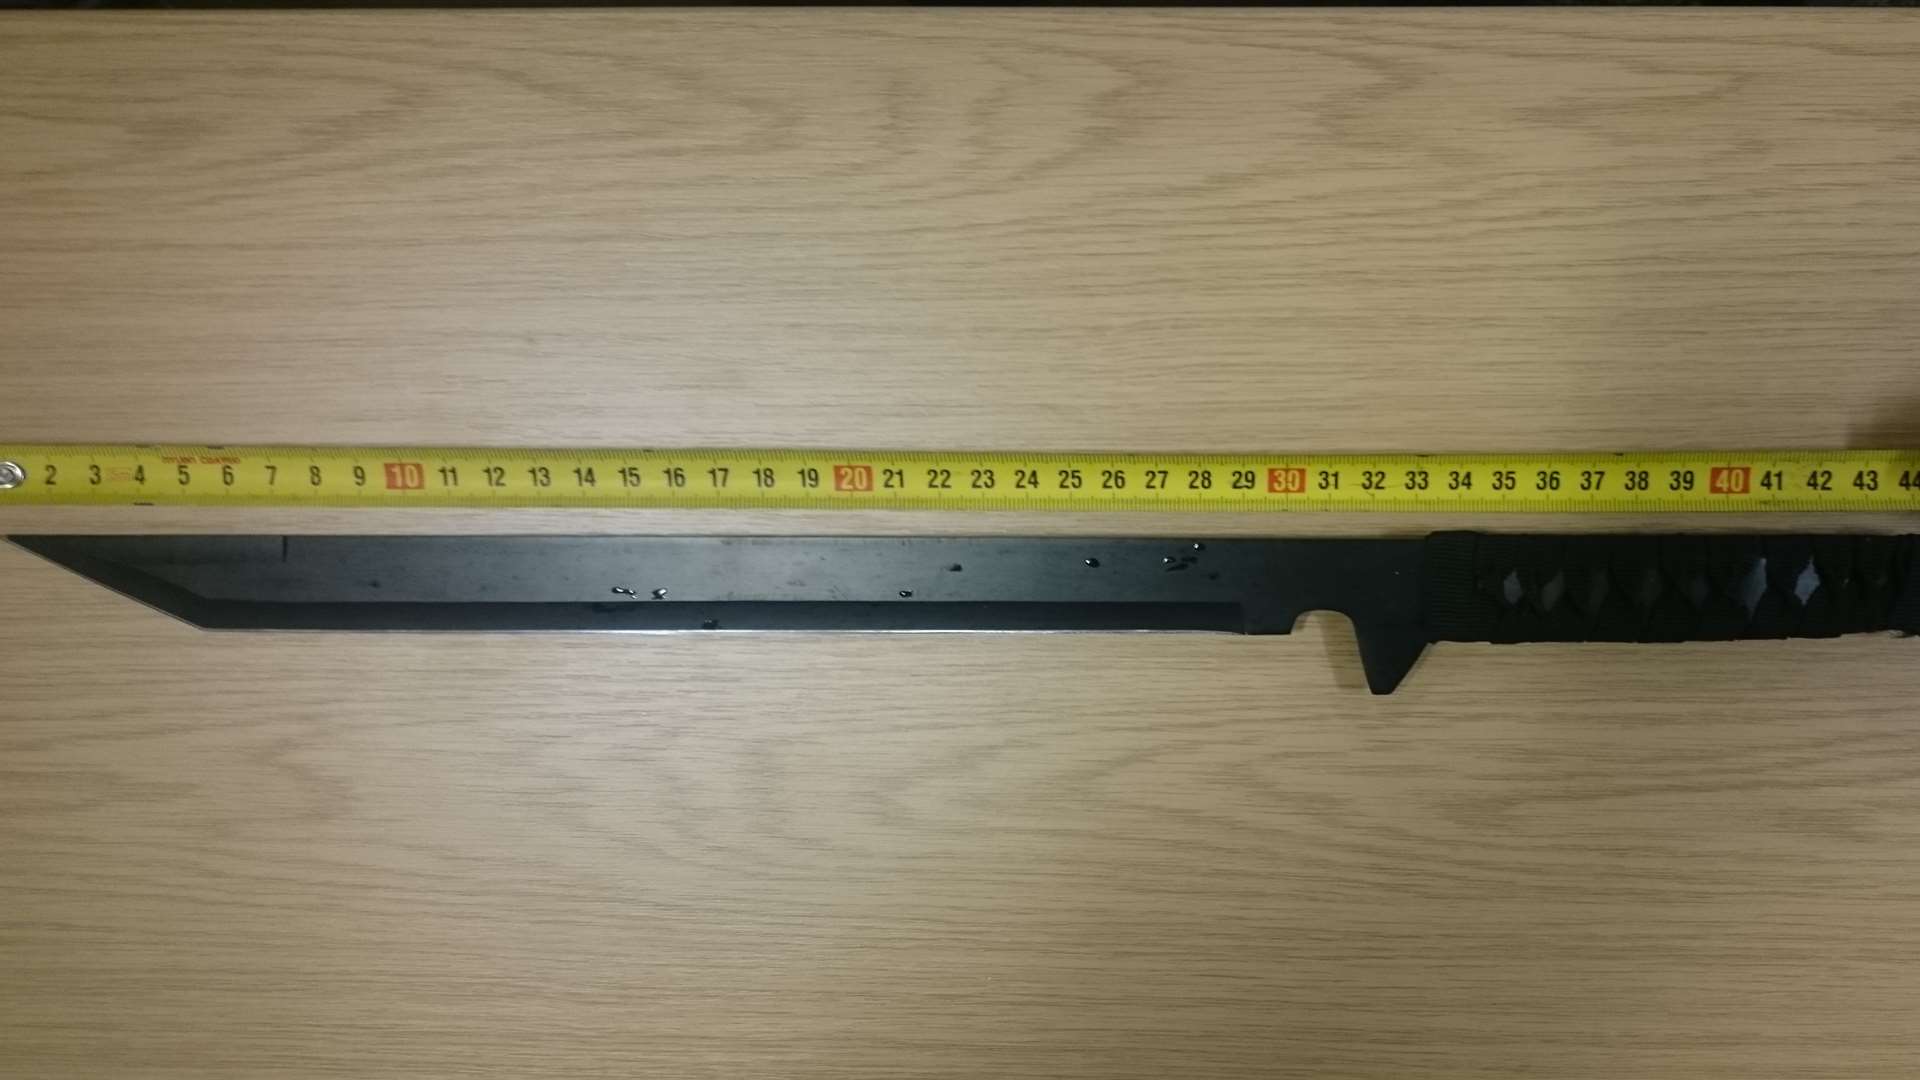 An 18-inch machete seized. Picture: Kent Police